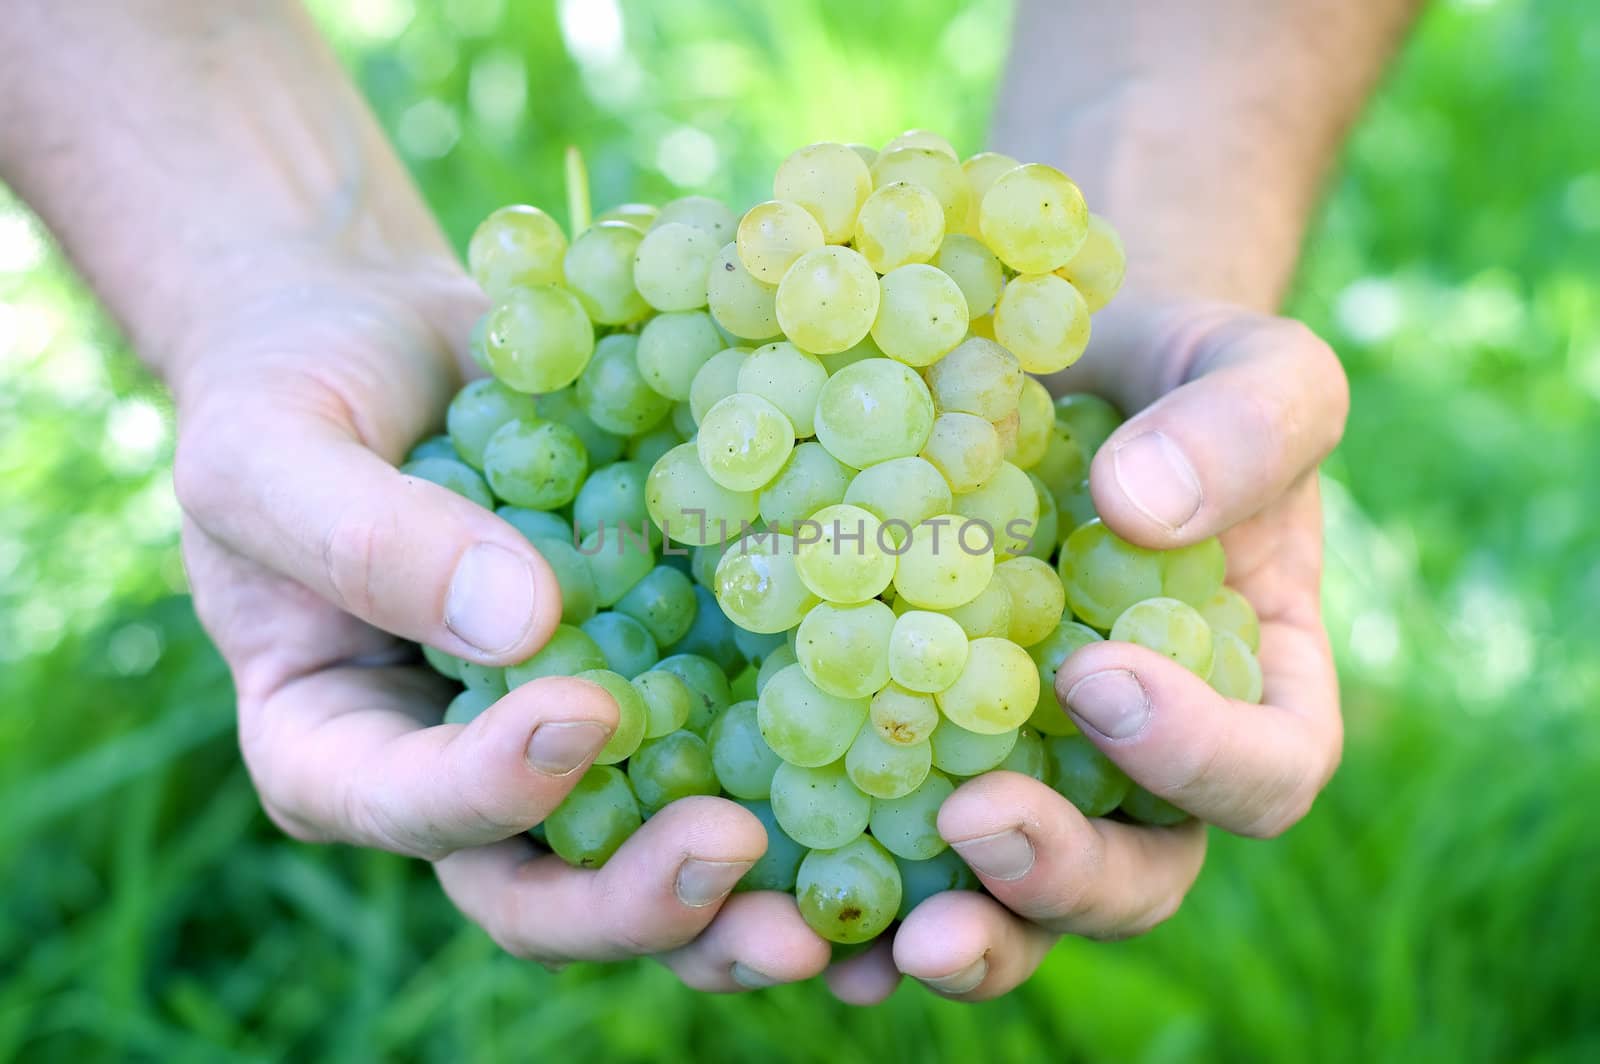 Hand Holding Bunch of Grapes by Rainman